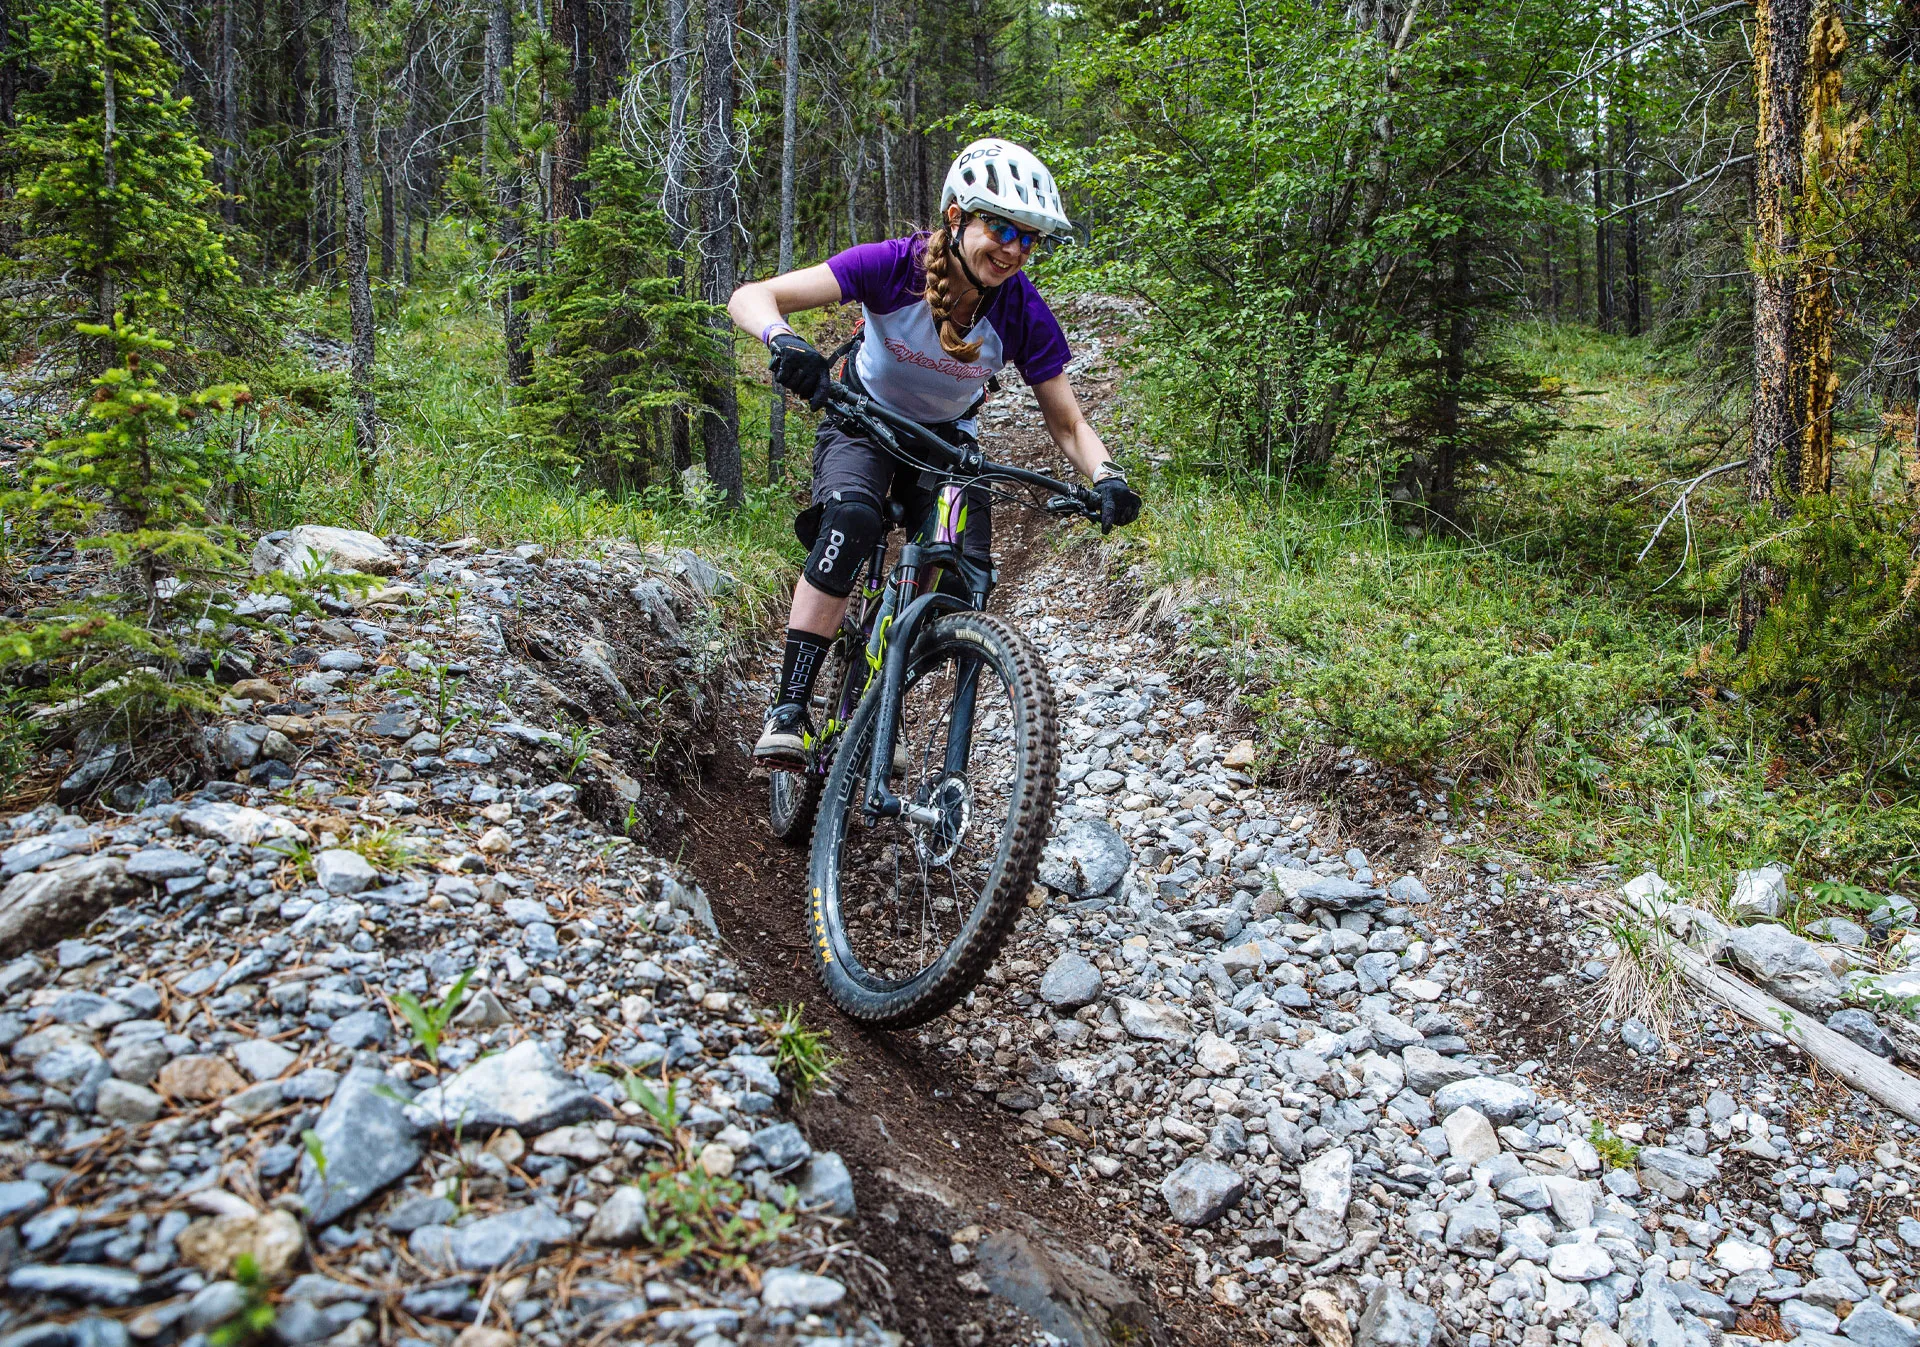 Mountain biking in Canmore Nordic Centre Provincial Park (Photo credit: Plaid Goat/Ryan Creary).